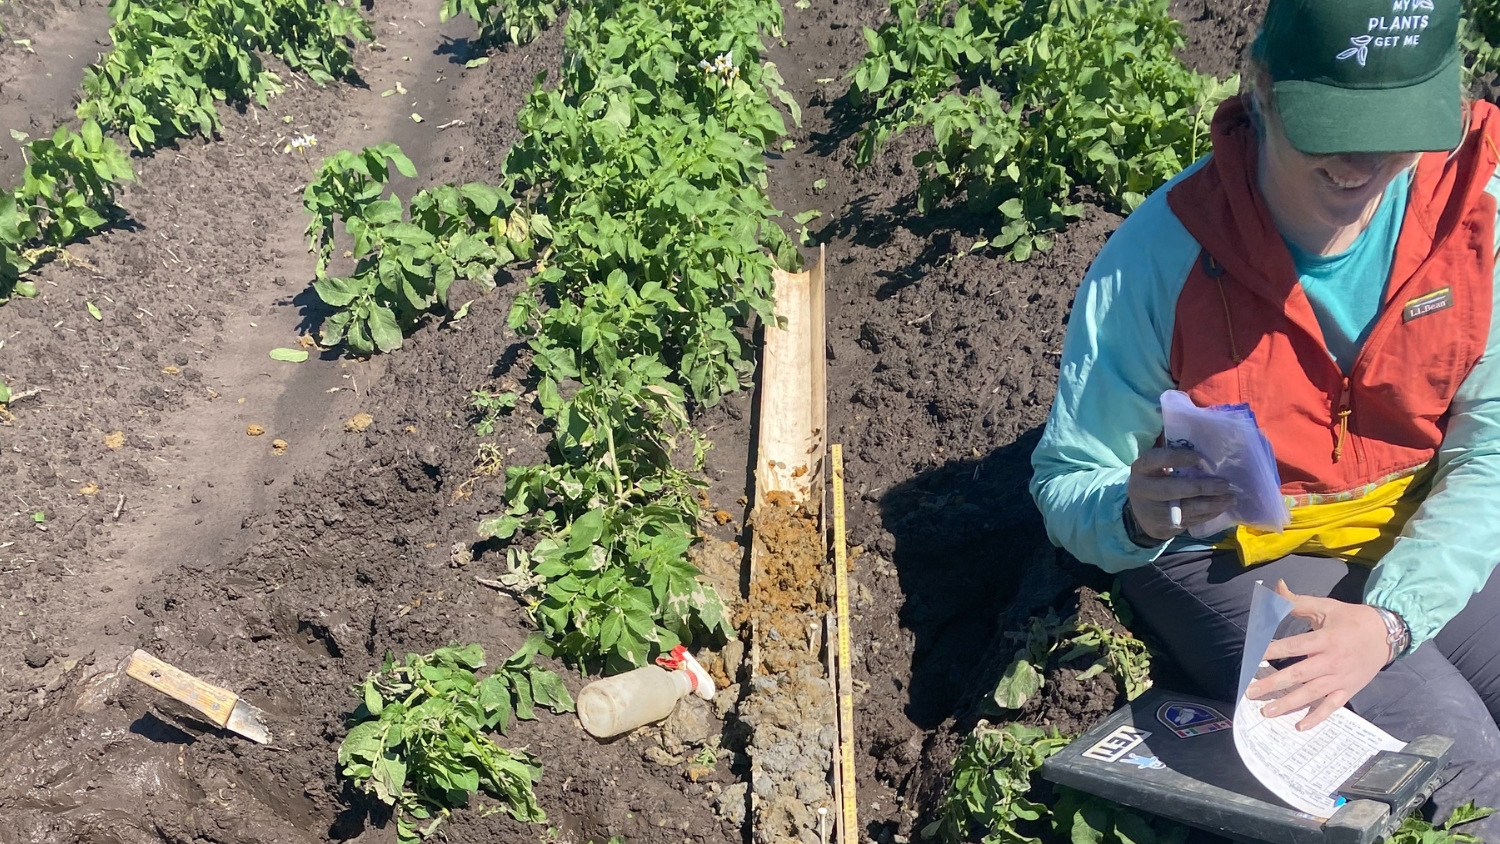 NC State soil science graduate student Julia Janson collects and examines soil cores in Eastern North Carolina.